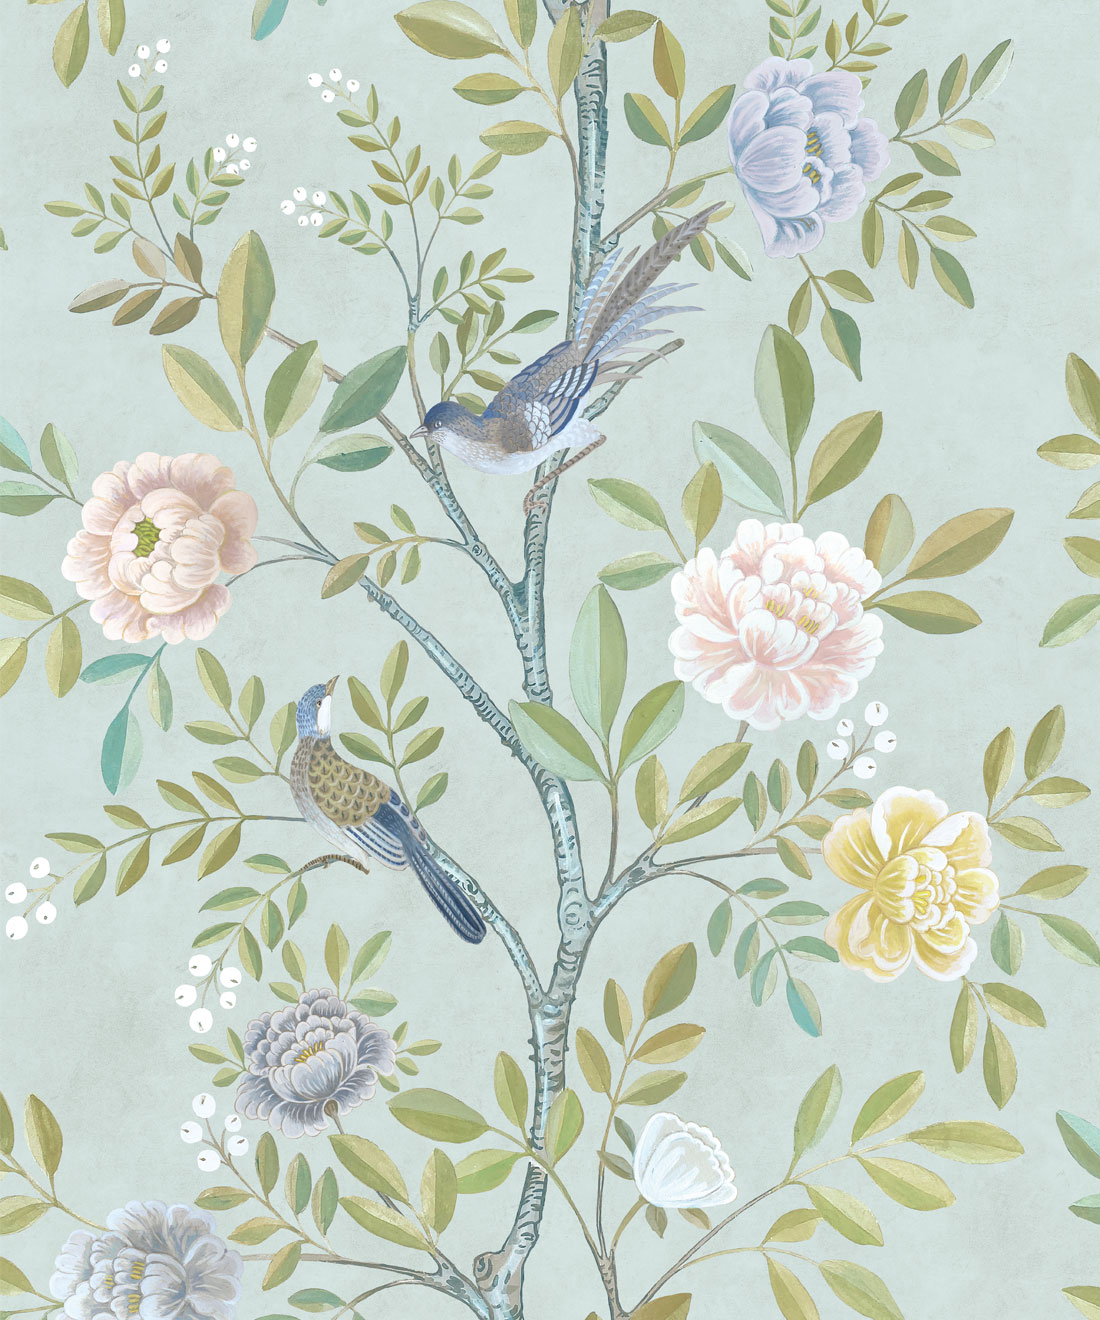 Flowers Peacock on The Blue Background Chinoiserie Wallpaper